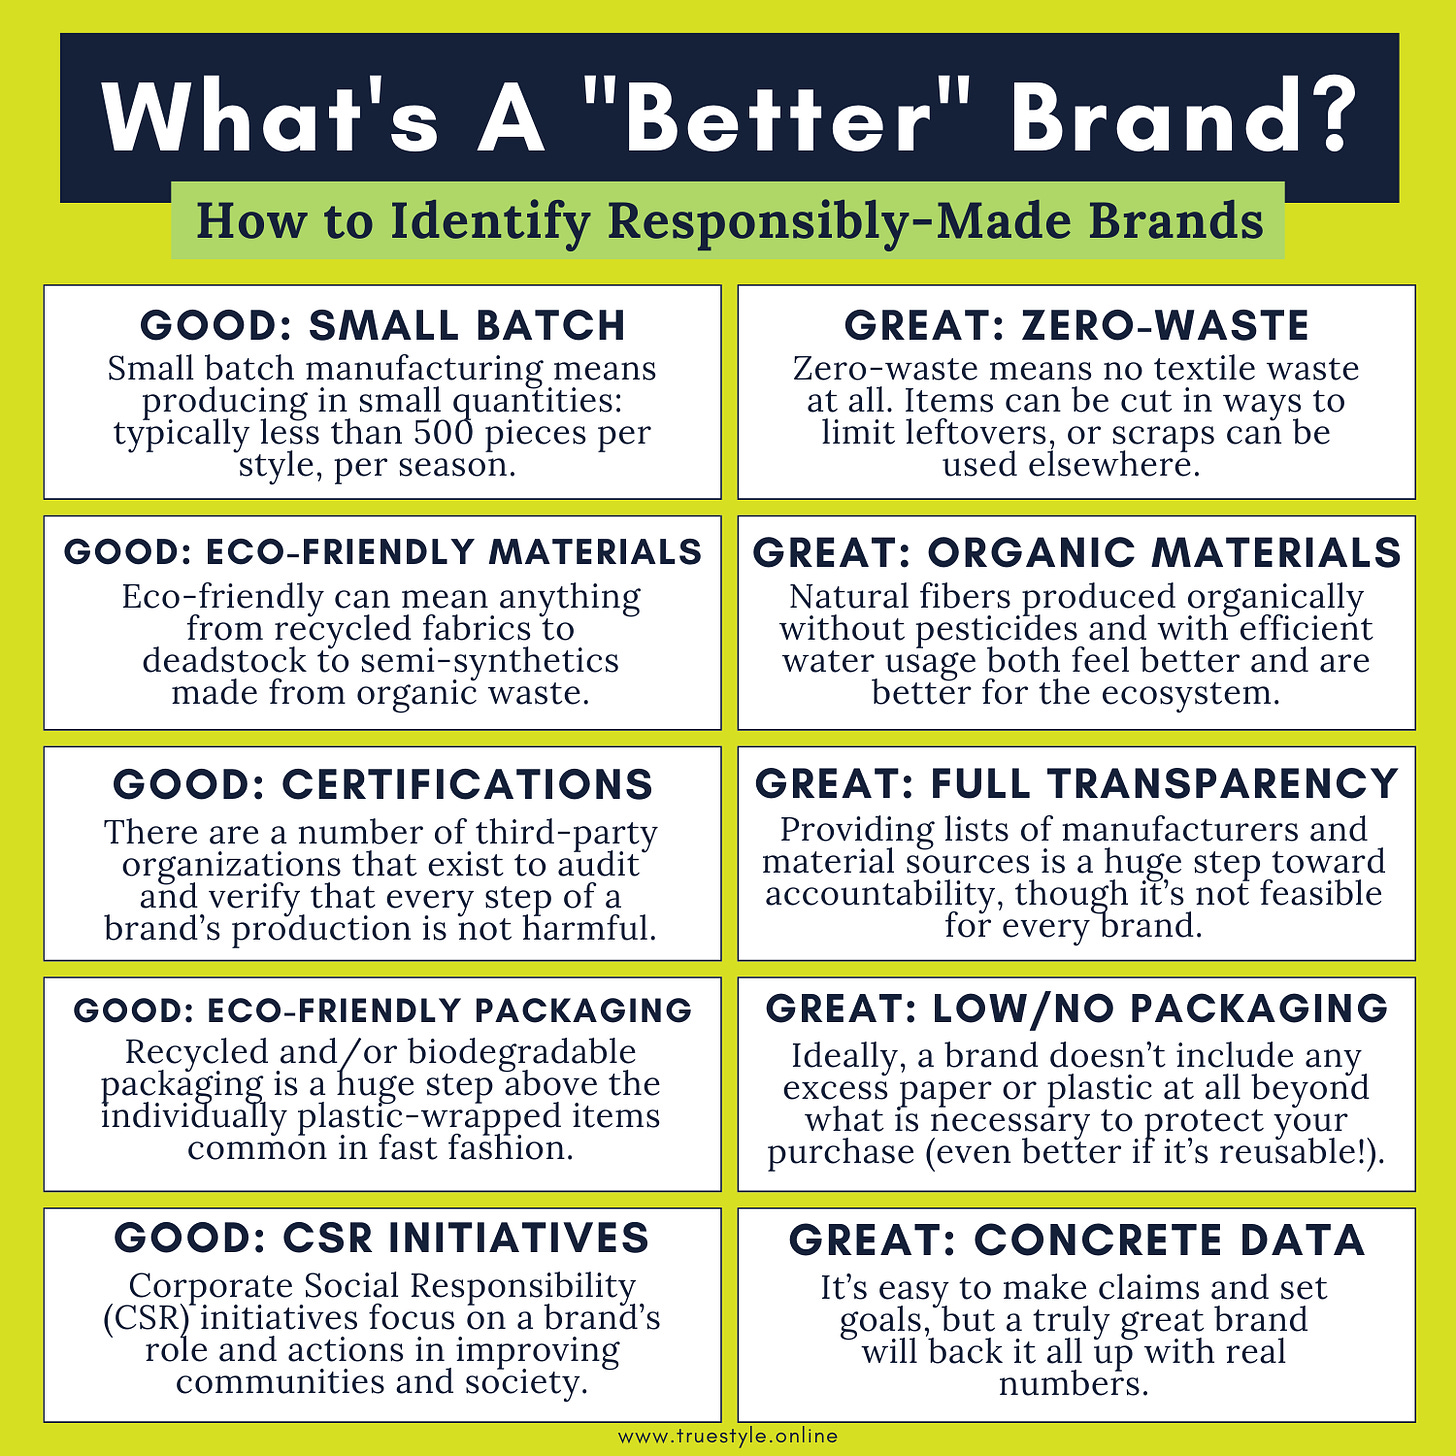 Infographic titled  What’s A Better Brand? How do you identify responsibly made brands?   GOOD: Small Batch manufacturing in small quantities: typically less than 500 pieces per style, per season. GREAT: Zero-Waste means no textile waste at all. Items can be cut in ways to limit leftovers, or scraps can be used elsewhere.  GOOD: Eco-Friendly Materials can mean anything from recycled fabrics to deadstock to semi-synthetics made from organic waste. GREAT: Organic Materials produced organically without pesticides and with efficient water usage both feel better and are better for the ecosystem.  GOOD: Certifications come from third-party organizations that exist to audit and verify that every step of a brand’s production is not harmful. GREAT: Full Transparency It’s one thing to let an agency into your supply chain, it’s even better to let your consumer into your supply chain.  GOOD: Eco-Friendly Packaging like recycled and/or biodegradable packaging is a huge step above the individually plastic-wrapped items common in fast fashion. GREAT: Low/No Packaging, or when a brand doesn’t include any excess paper or plastic at all beyond what is necessary to protect your purchase (even better if it’s reusable!), is ideal.   GOOD: CSR Initiatives focus on a brand’s role and actions in improving communities and society. GREAT: Concrete Data is better, because it’s easy to make claims and set goals, but a truly great brand will back it all up with real numbers.